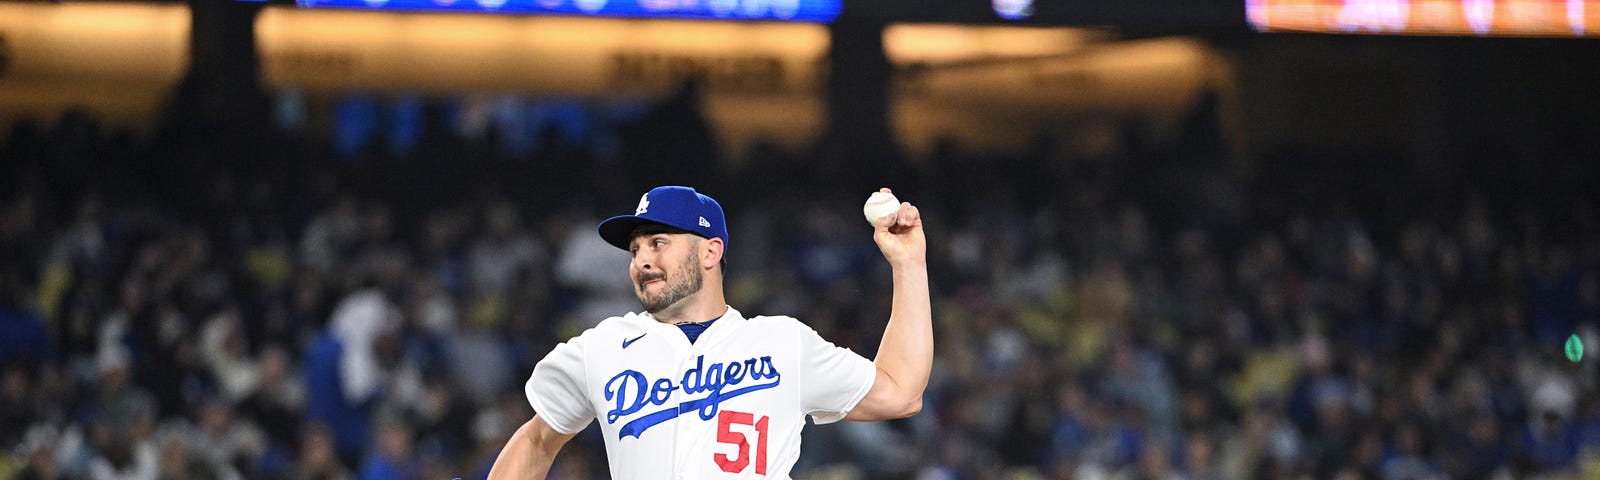 Fire, swag and calm — diverse personalities make Dodger bullpen a success, by Cary Osborne